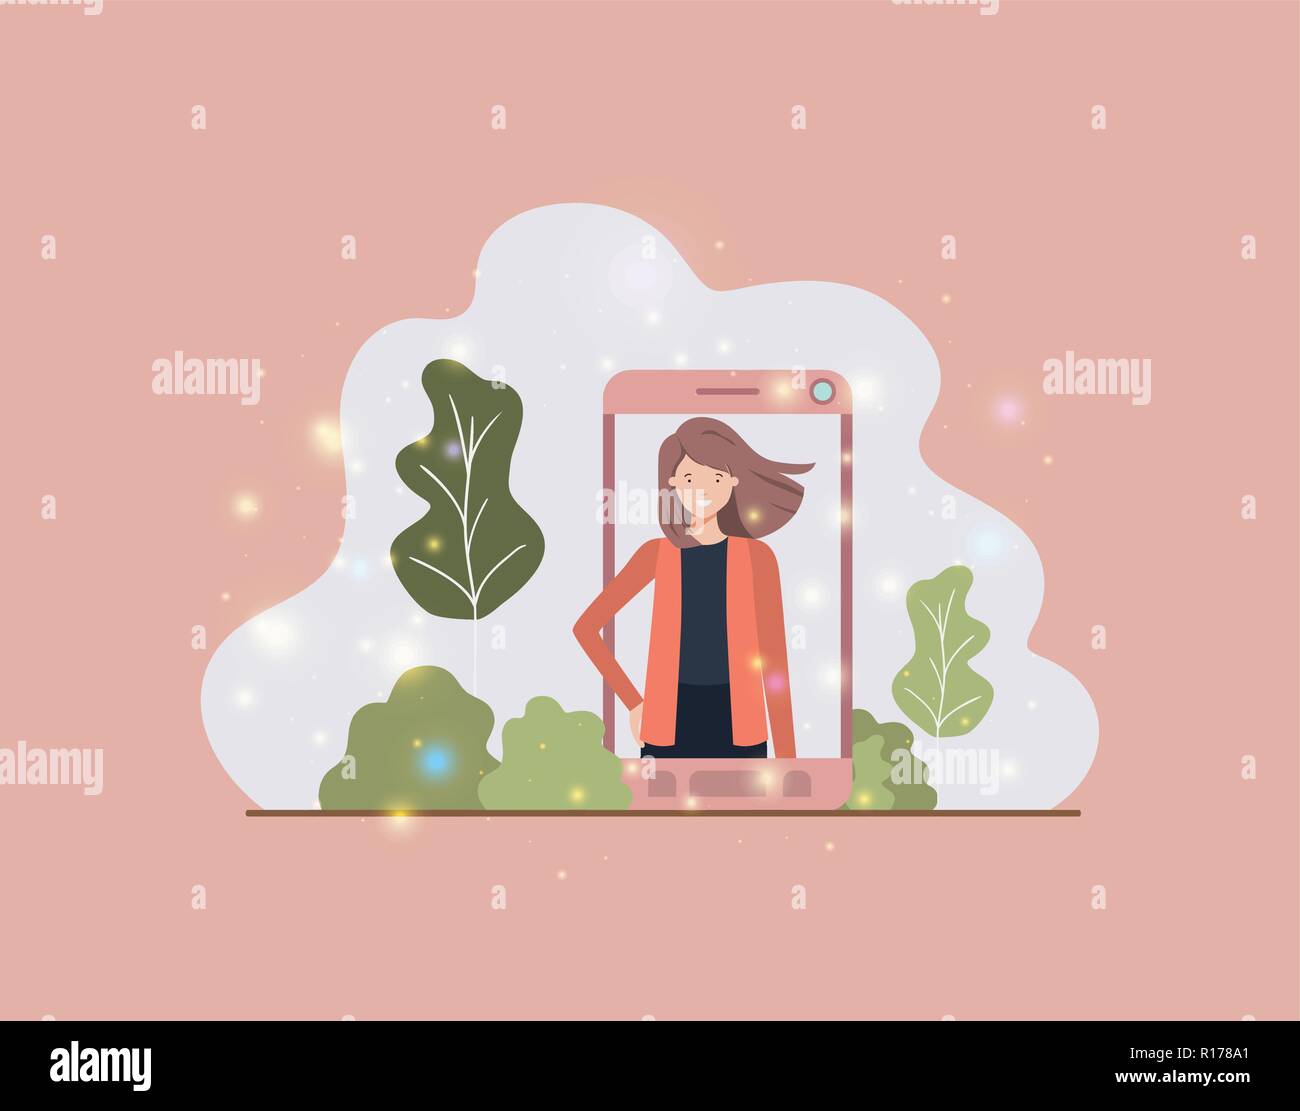 woman in smartphone on landscape Stock Vector